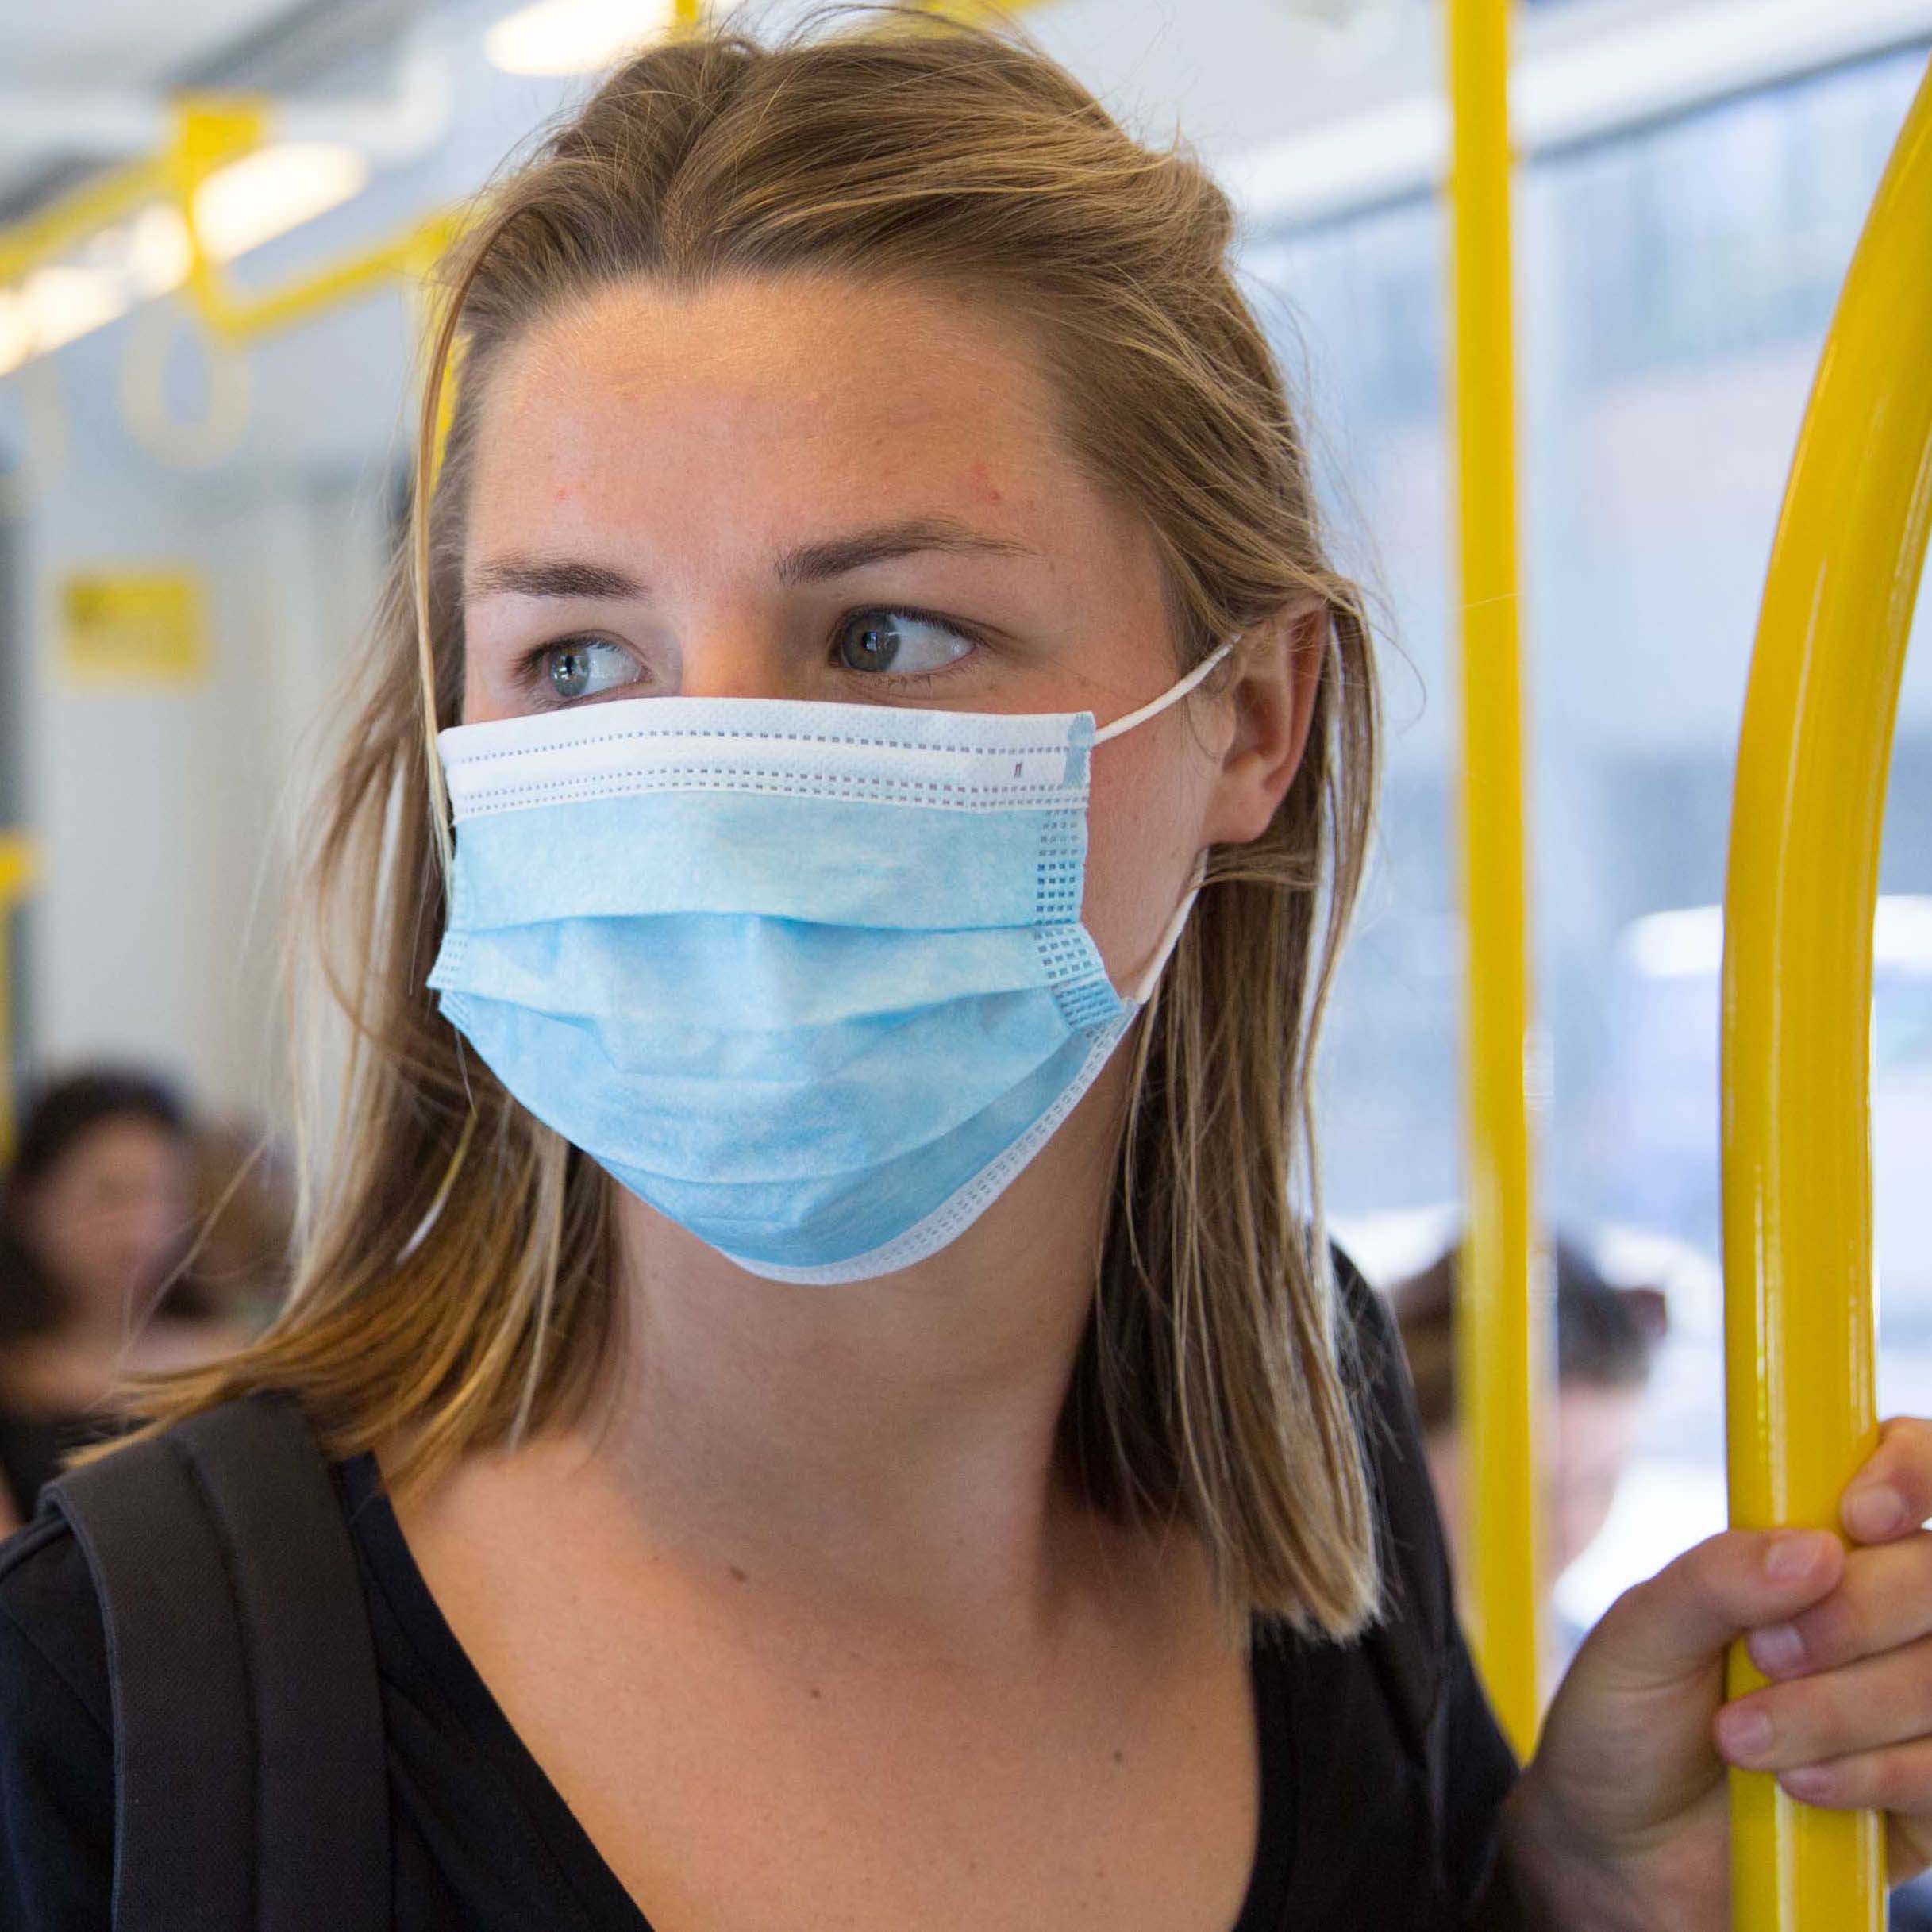 Image shows a woman on a tram wearing a surgical face mask during the COVID-19 pandemic.